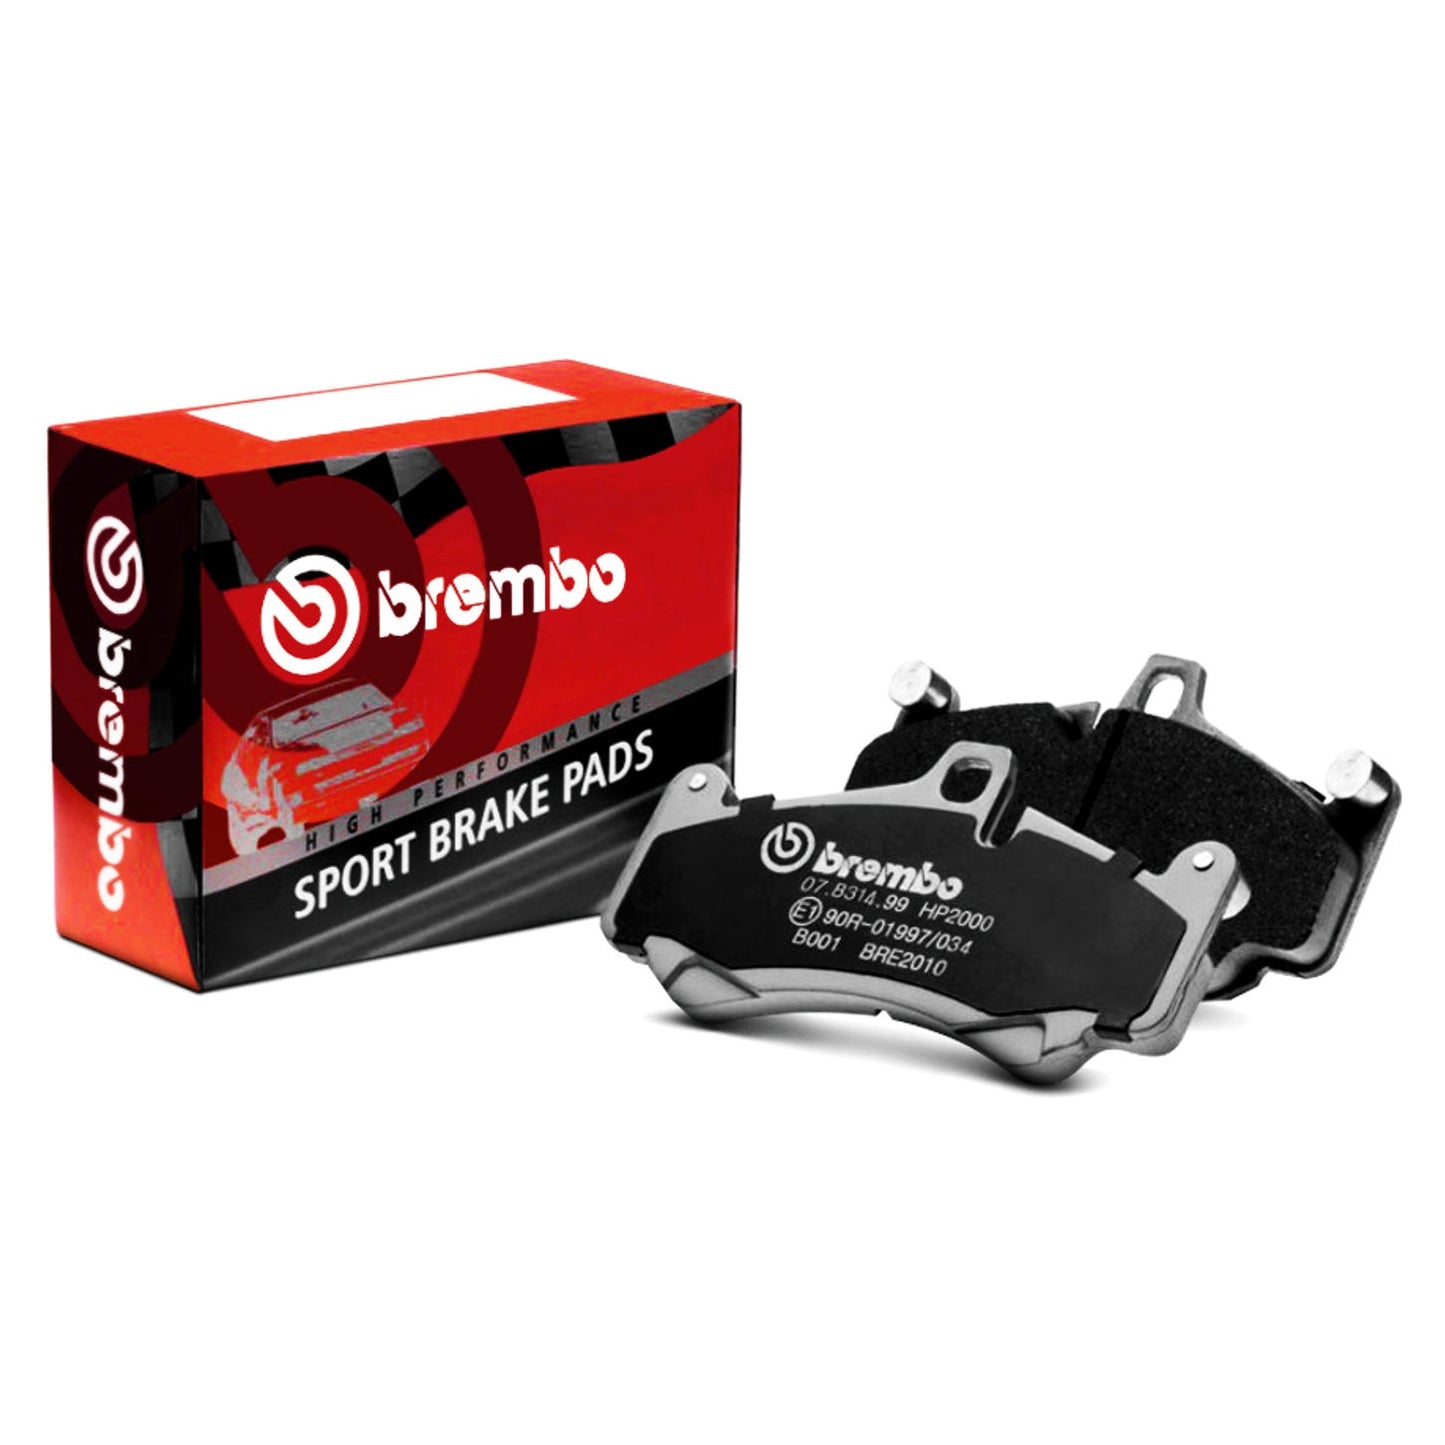 Brembo Sport HP2000 Front Brake Pads for Mitsubishi Eclipse IV (DKA) 2.4 GS 163bhp (05-12)